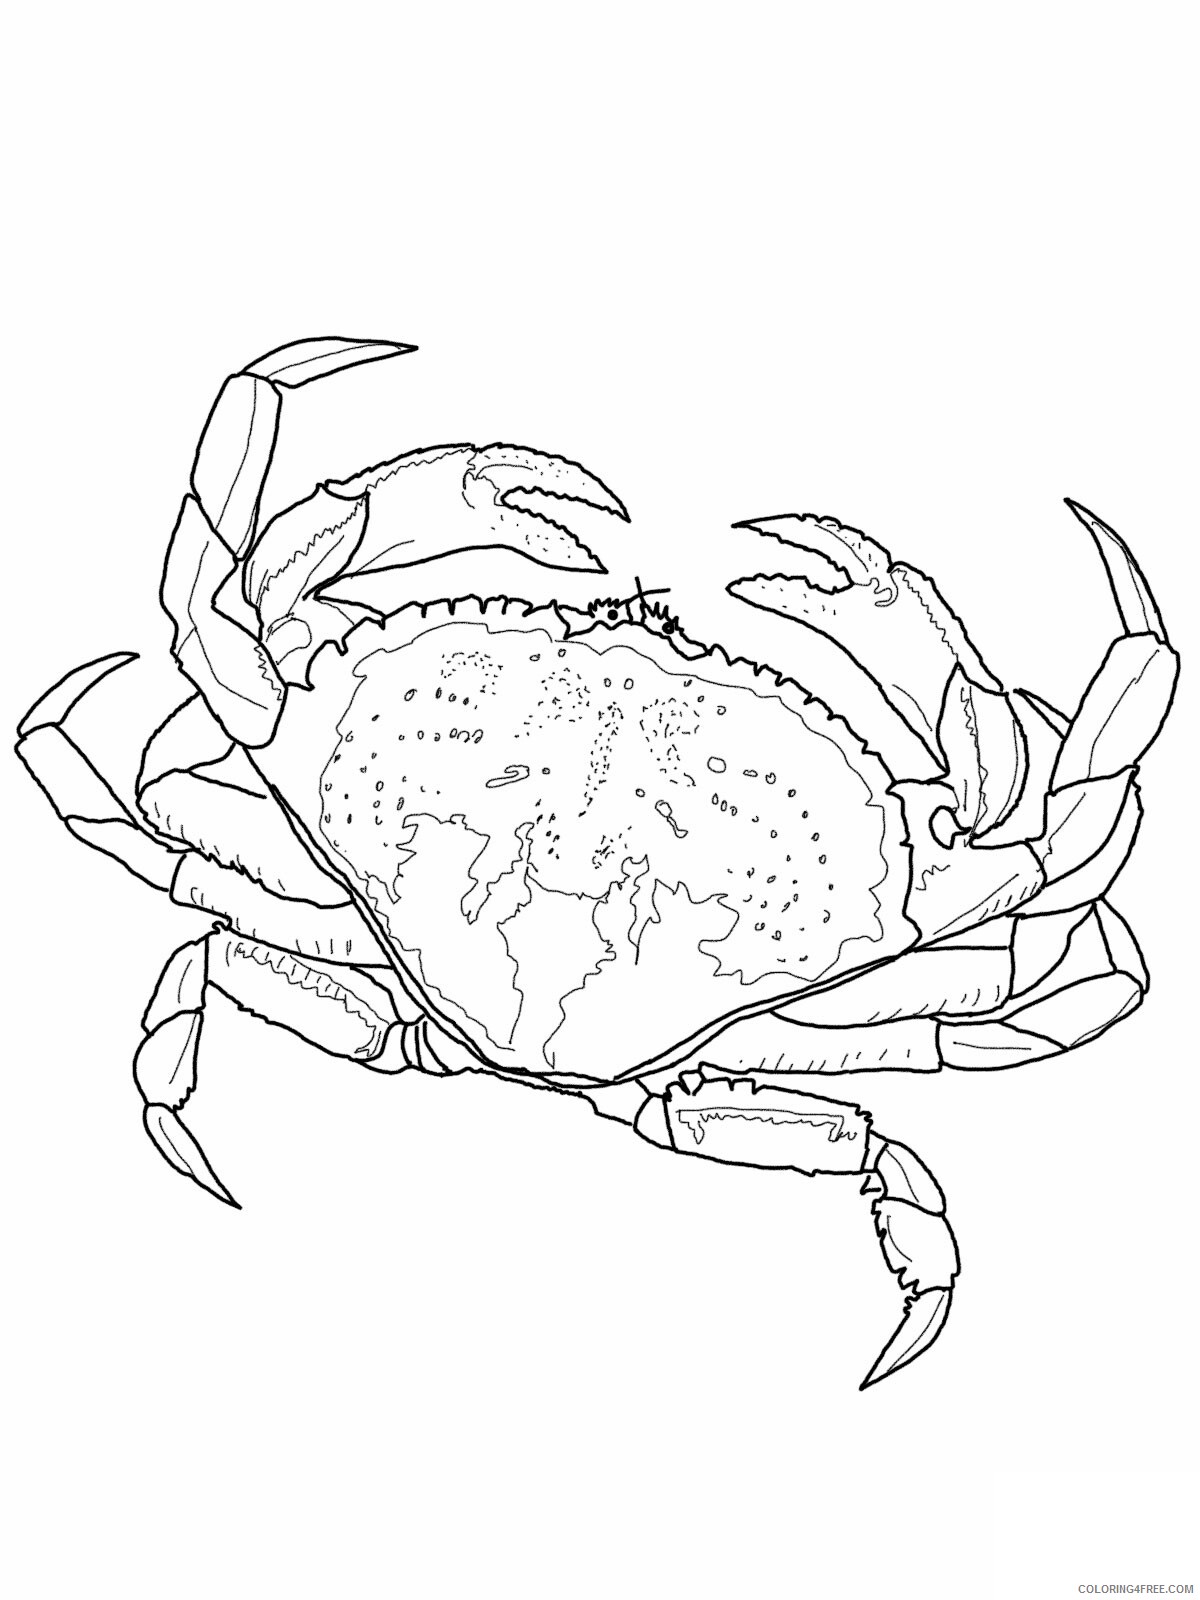 Crab Coloring Pages Animal Printable Sheets Pictures of Crab 2021 1247 Coloring4free